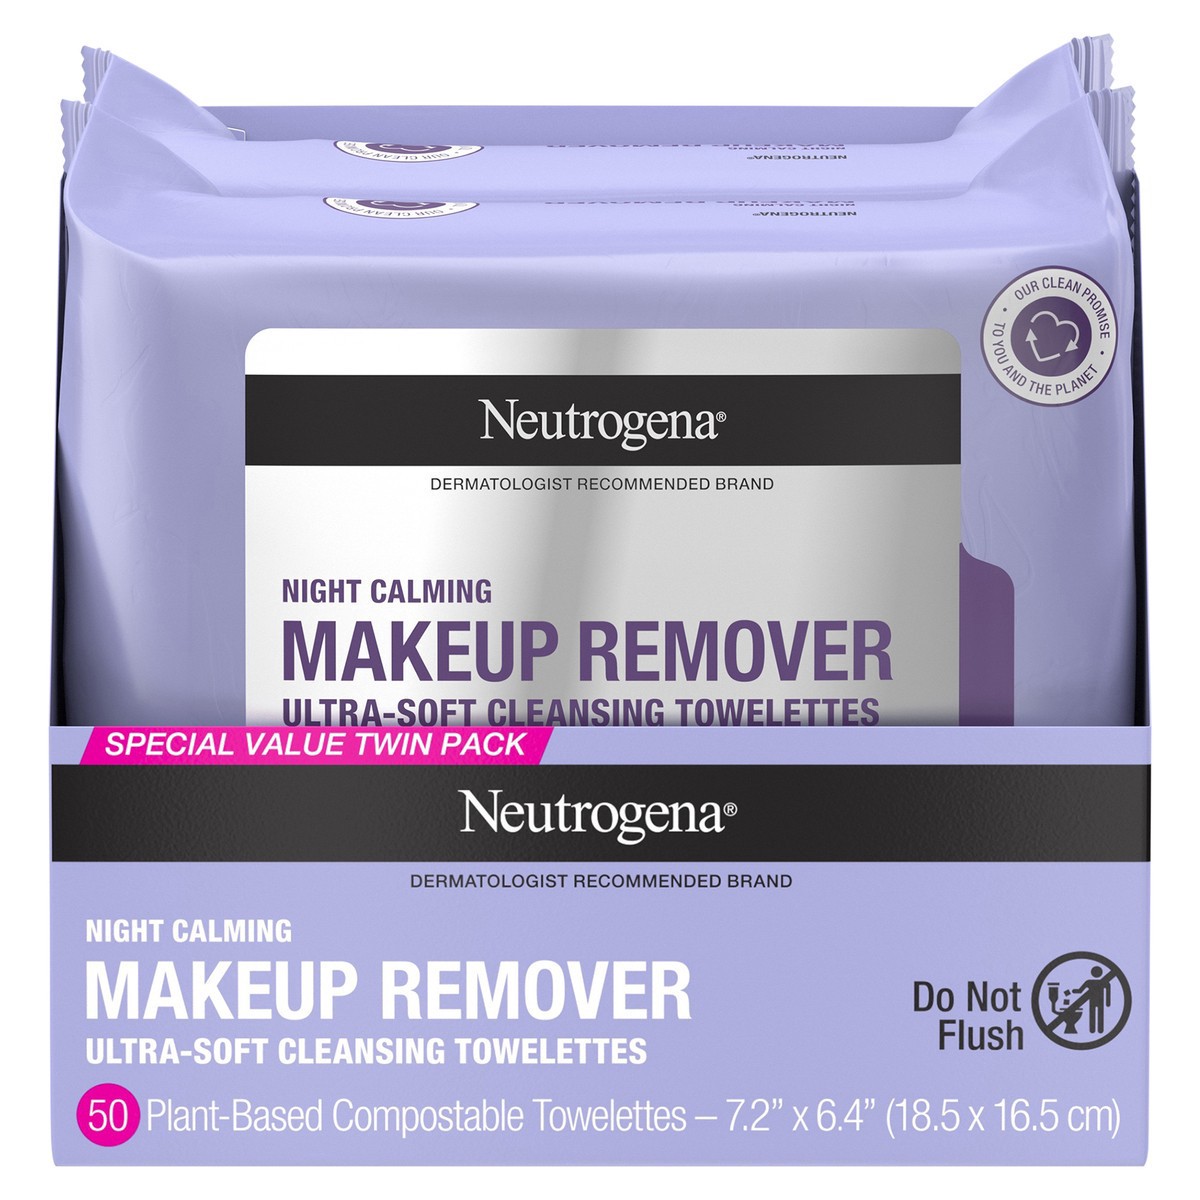 slide 1 of 7, Neutrogena Night Calming Makeup Remover Face Wipes, Nighttime Cleansing Towelettes Remove Sweat, Dirt & Makeup & Calms Skin, Hypoallergenic, 100% Plant Based Cloth, Twin Pack, 2 x 25 ct, 50 ct